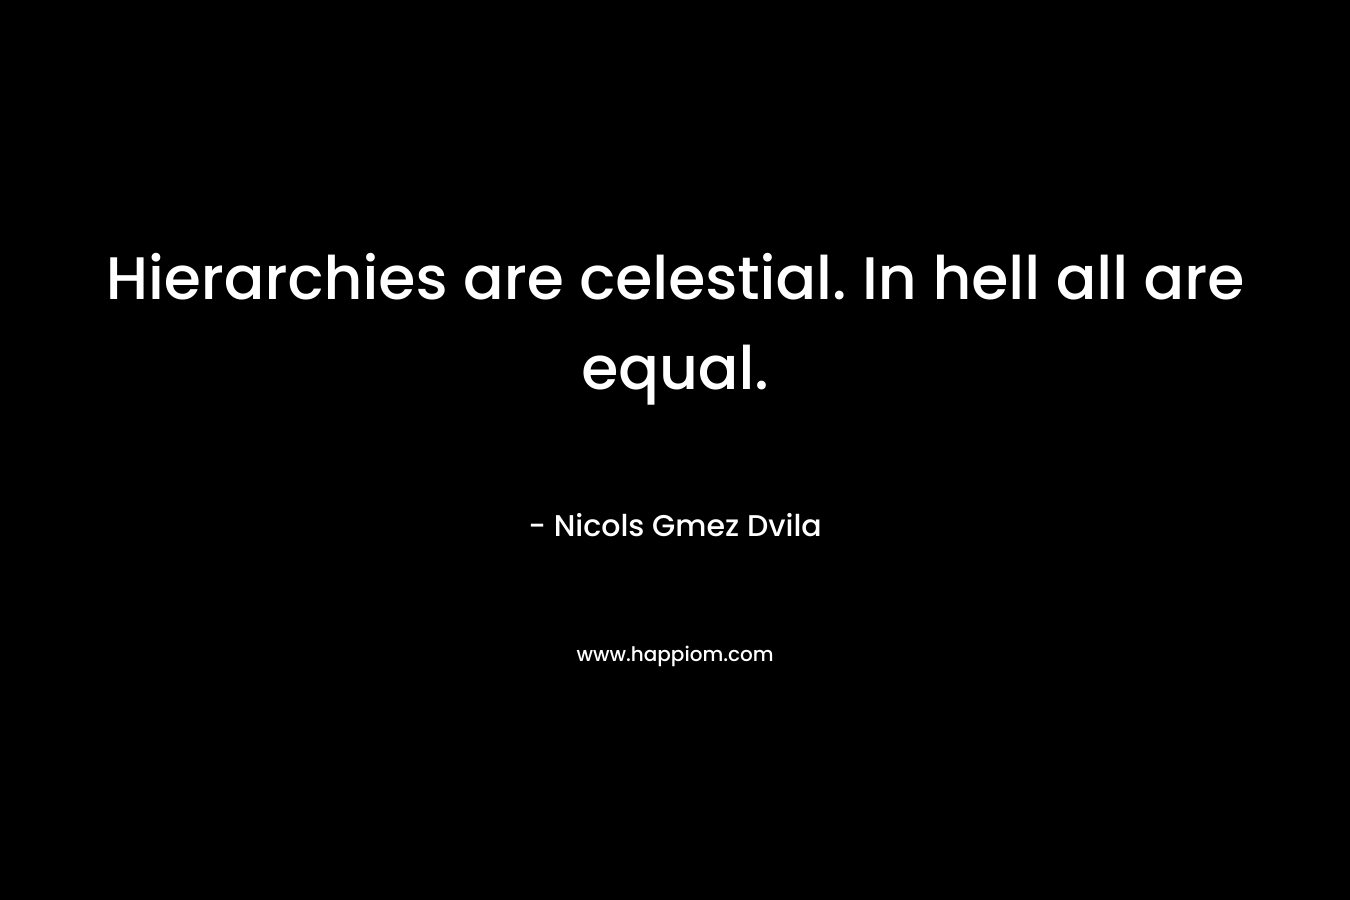 Hierarchies are celestial. In hell all are equal.